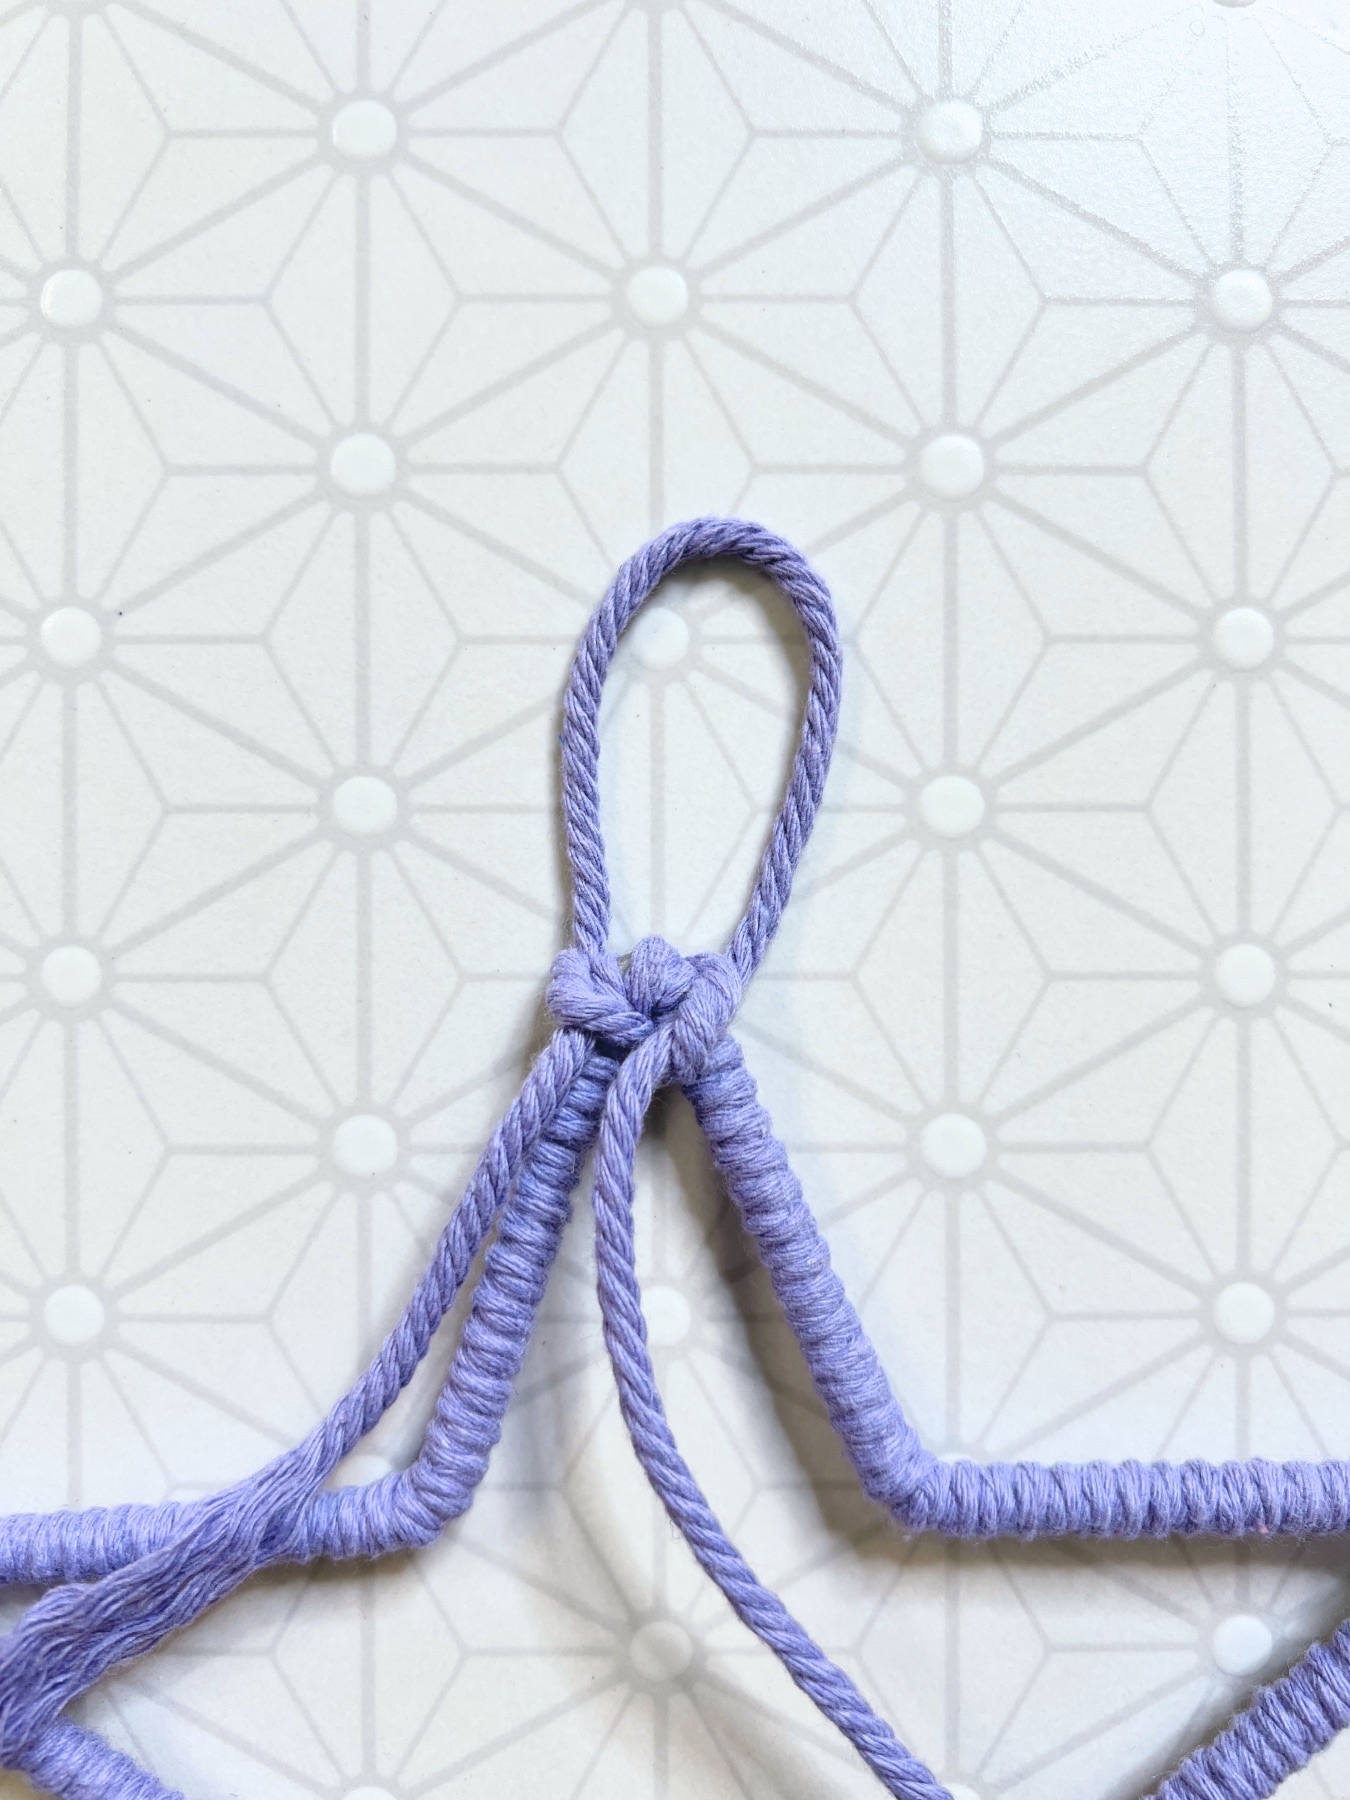 make a hanger at the top of the star macrame base